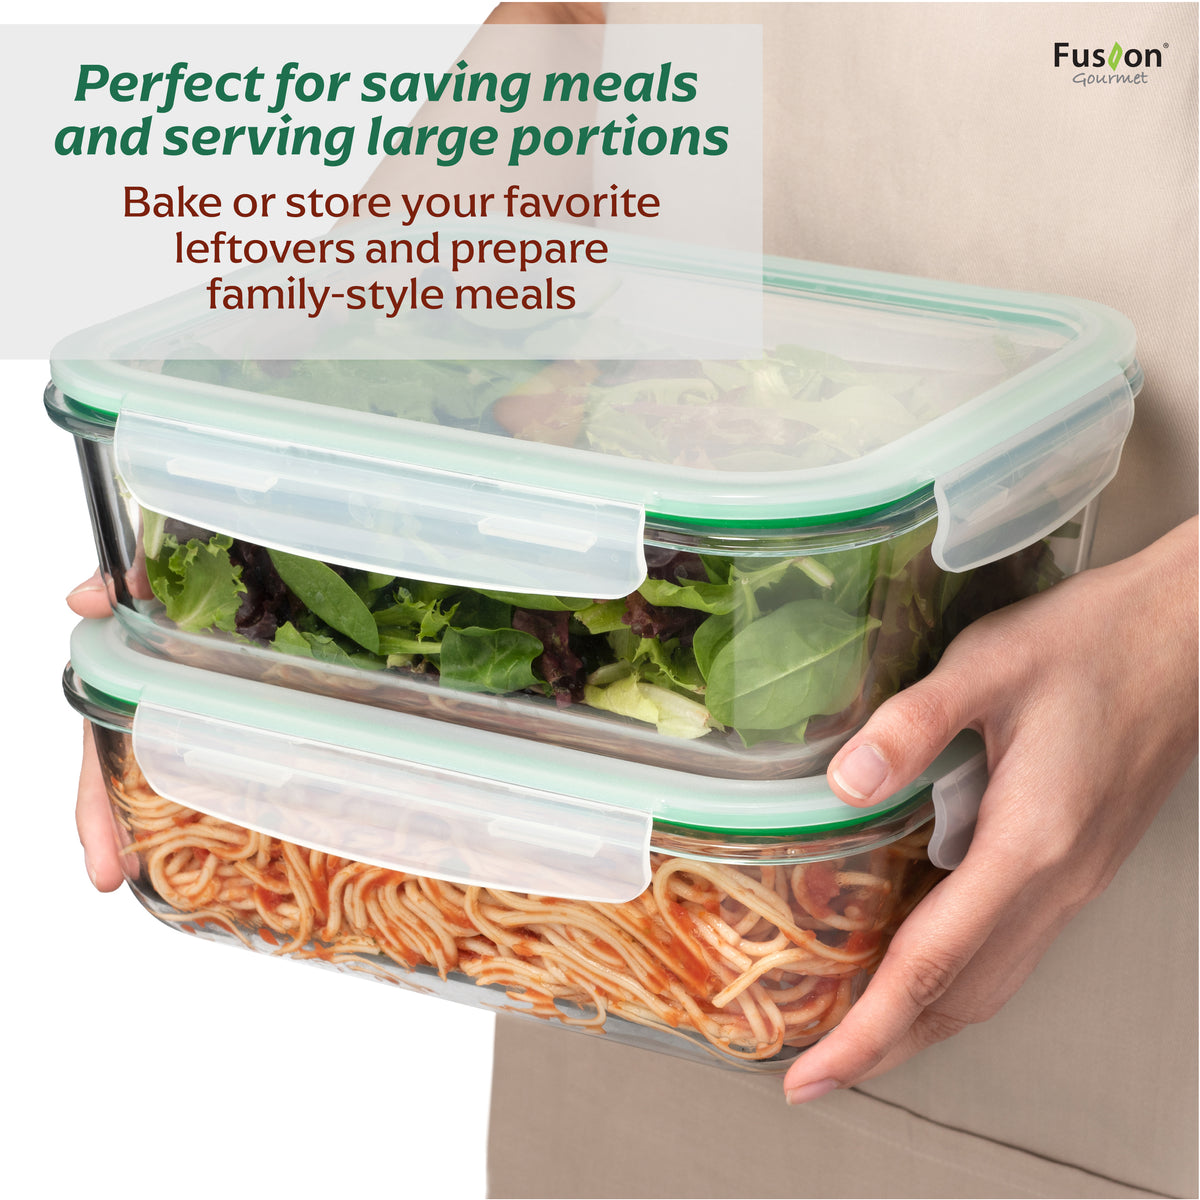 Glass Kitchen Storage Container 5-Piece Set w/ Labels Only $17.92 Shipped  for Prime Members (Reg. $40)